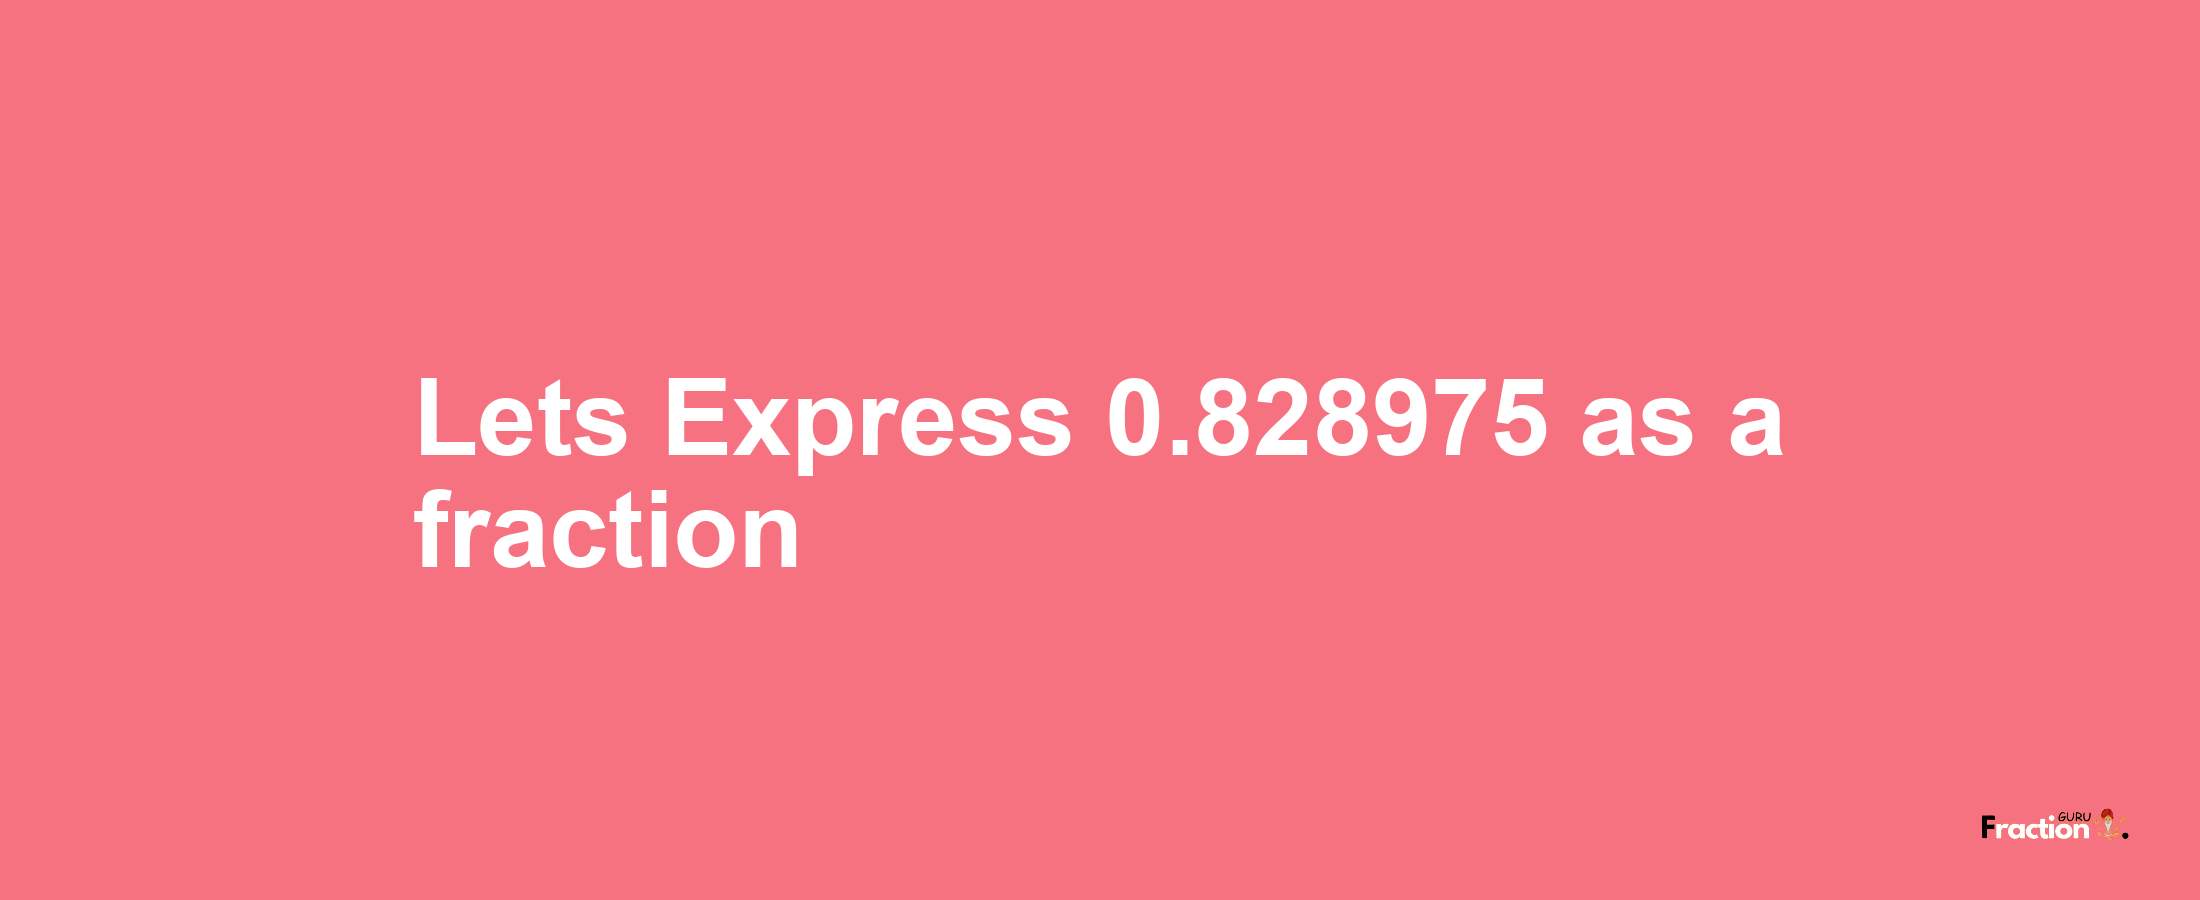 Lets Express 0.828975 as afraction